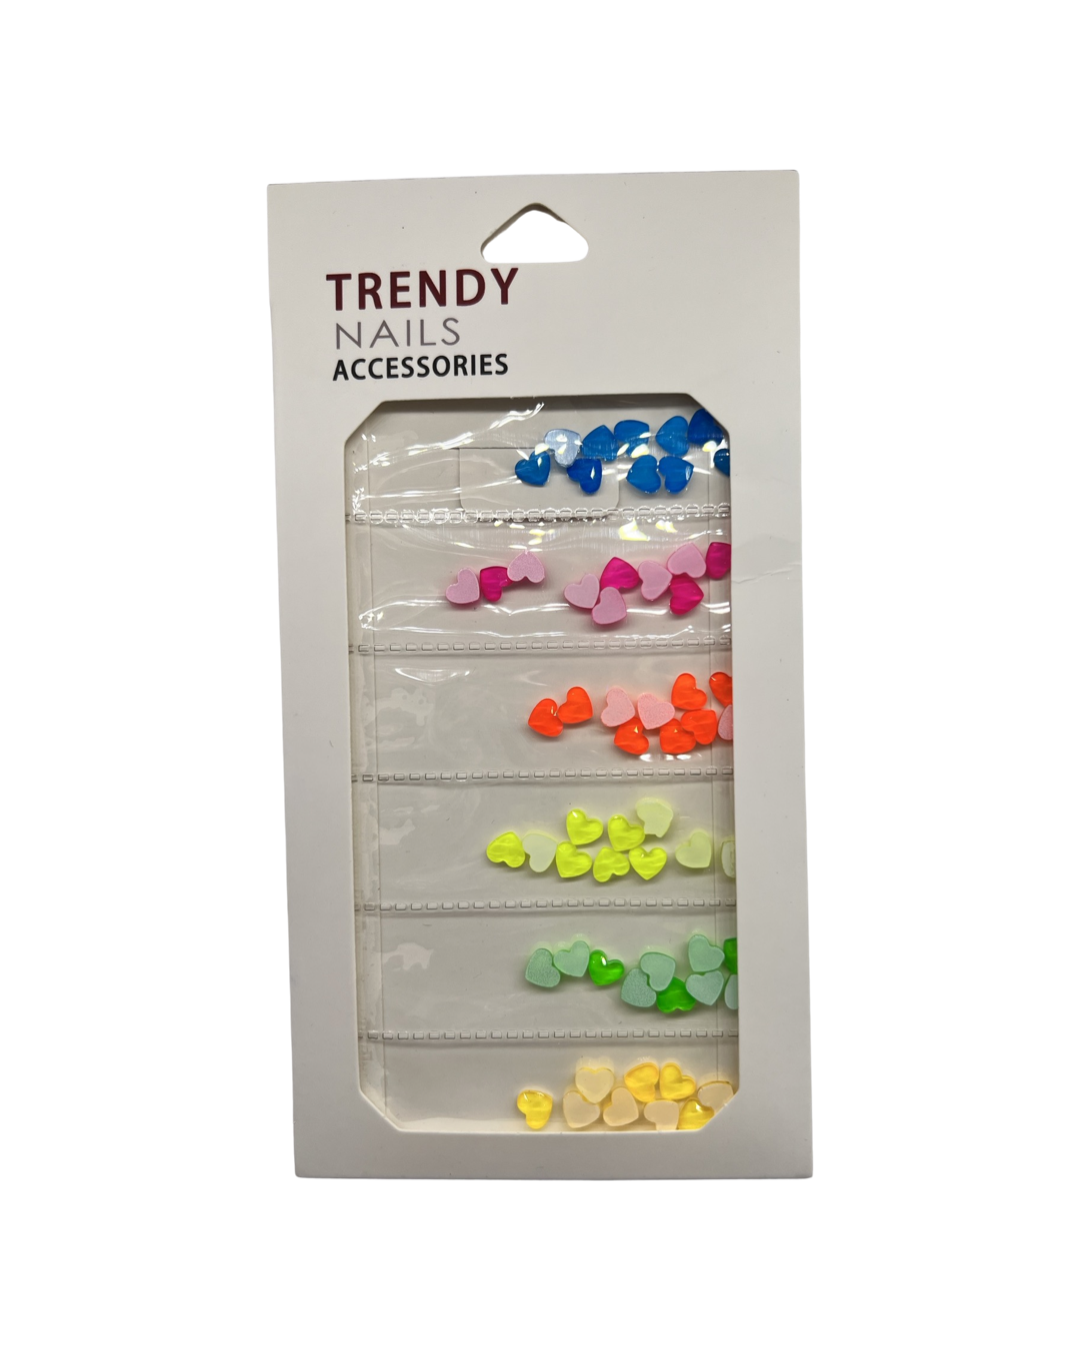 STRASS TRENDY NAILS ACCESSORIES